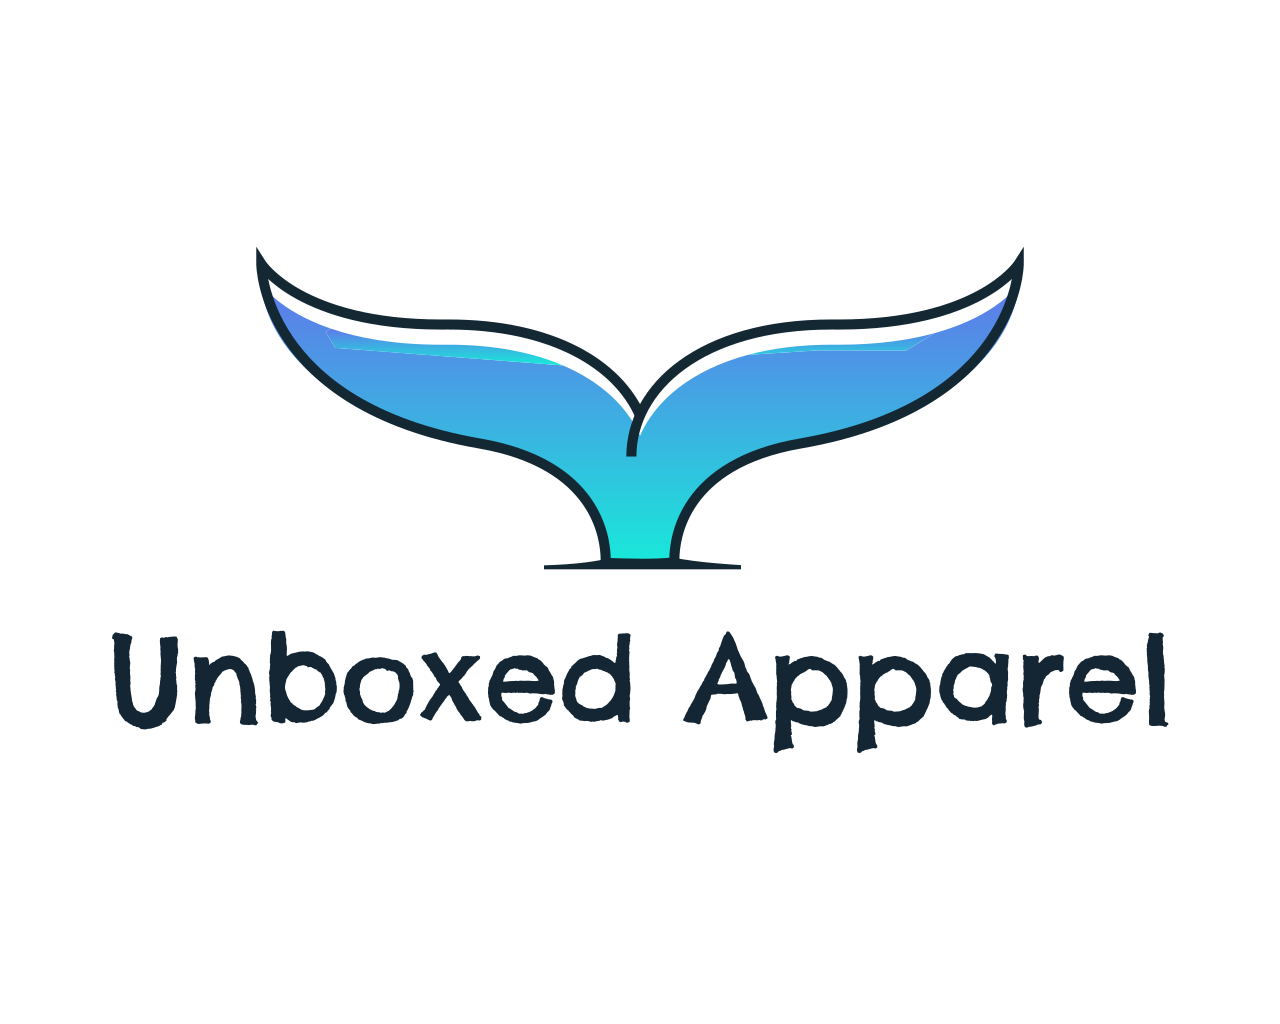 Unboxed Apparel